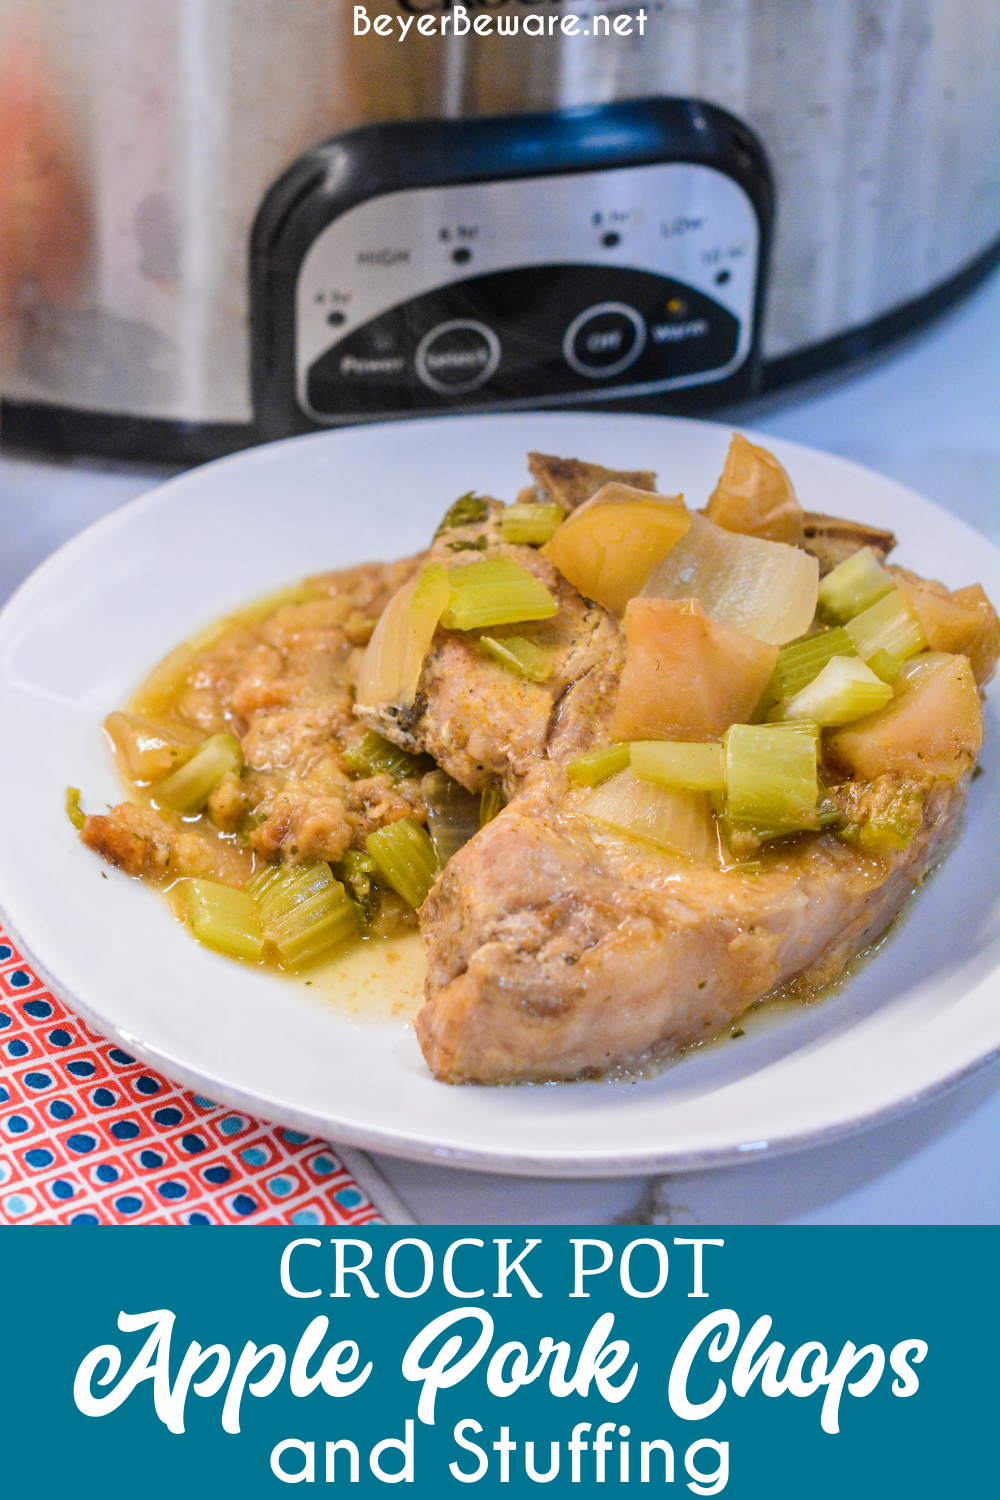 Crock pot apple pork chops is a flavorful crock pot pork chop recipe with lots of apples, onions, celery and cornbread stuffing.